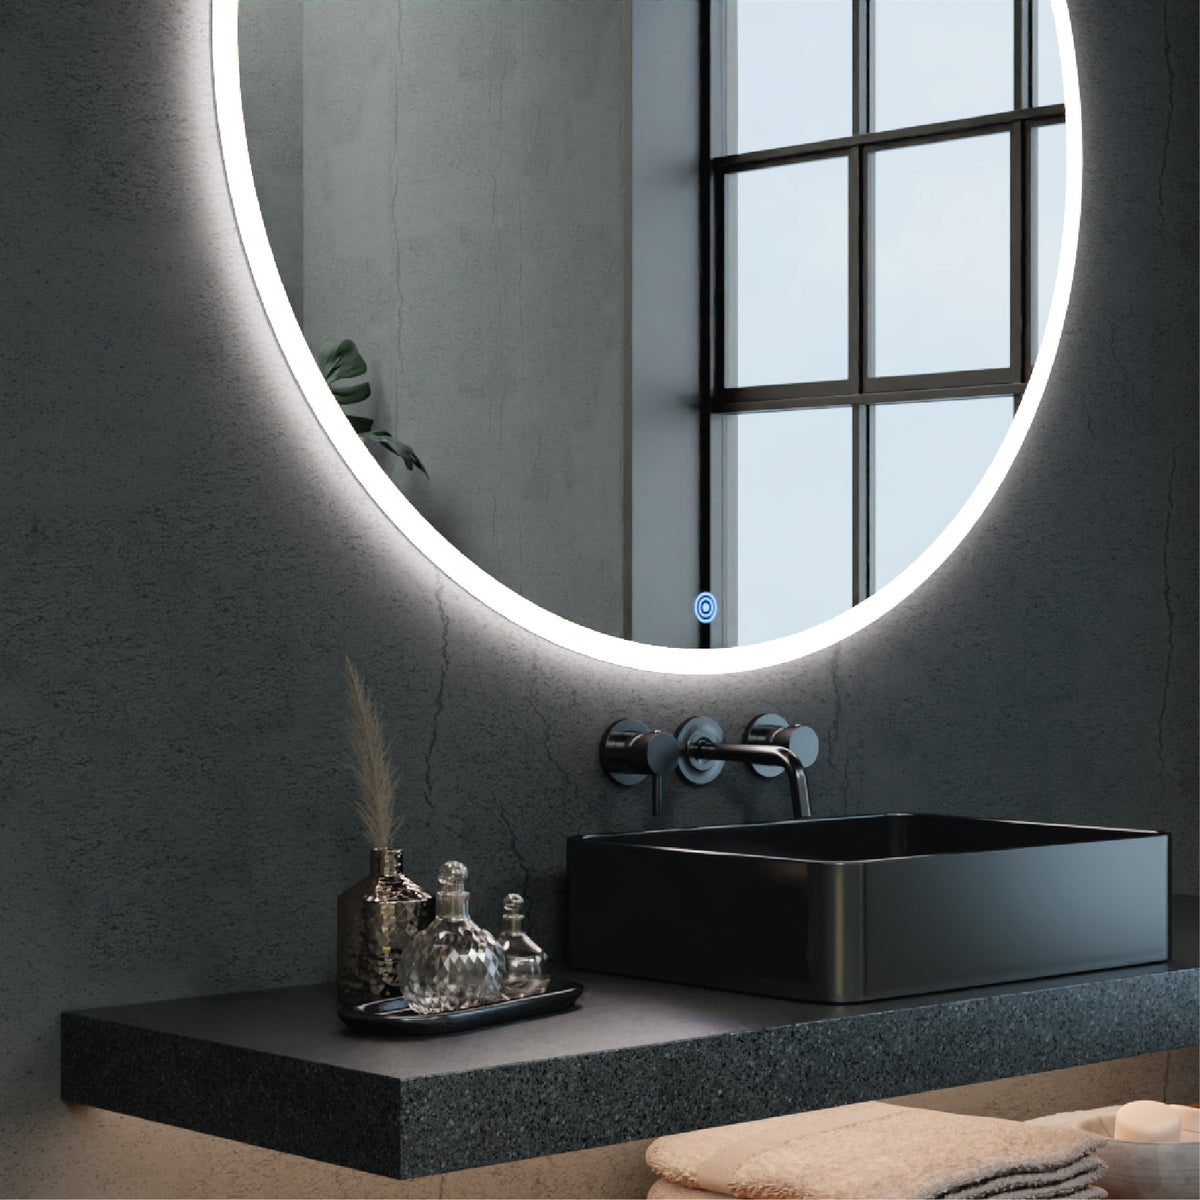 Elevate your grooming experience with the Titan LED Mirror's dimmable brightness feature.